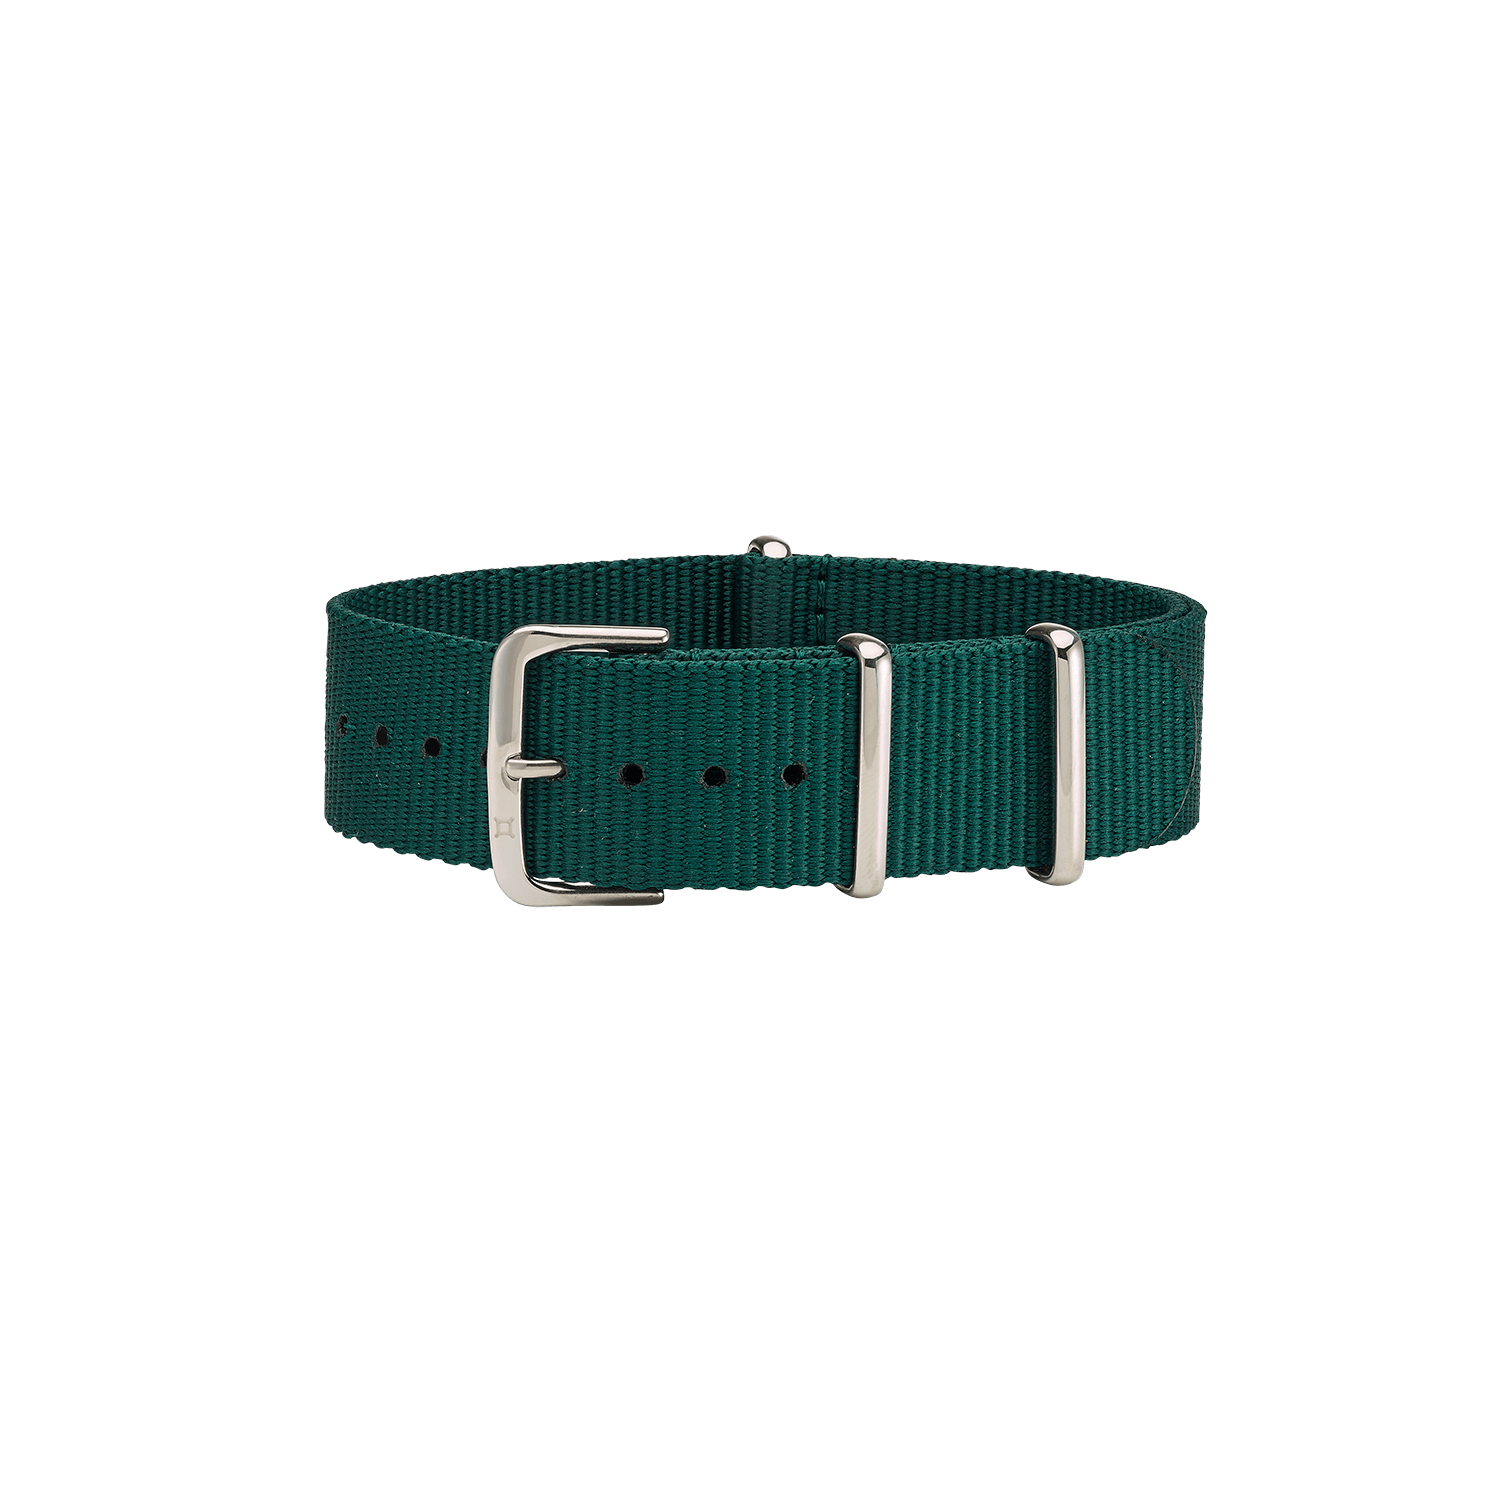 Dark green NATO strap watch with light beige and light teal accents.